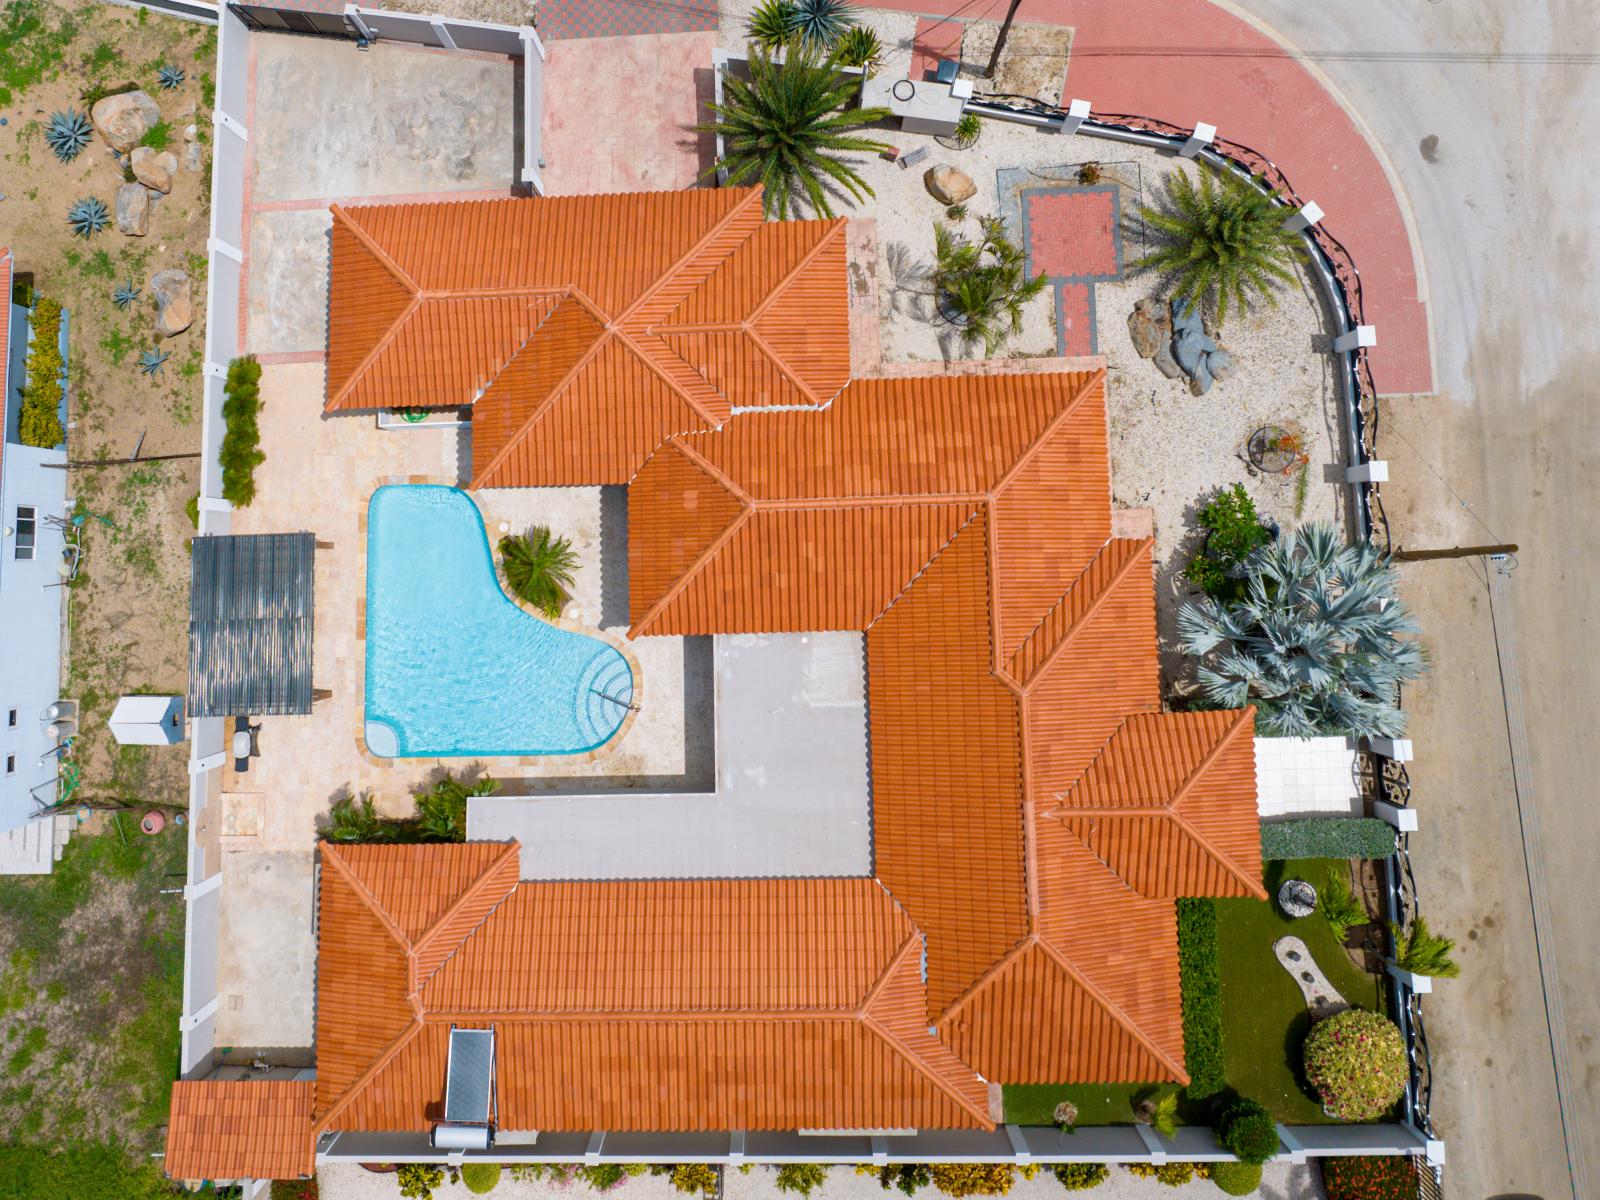 Inviting Home in Noord Aruba - Drone shot of the Home - Esmeralda Neighborhood - Peaceful and quite Neighborhood - Palm trees and tropical plants enhance the vacation feel